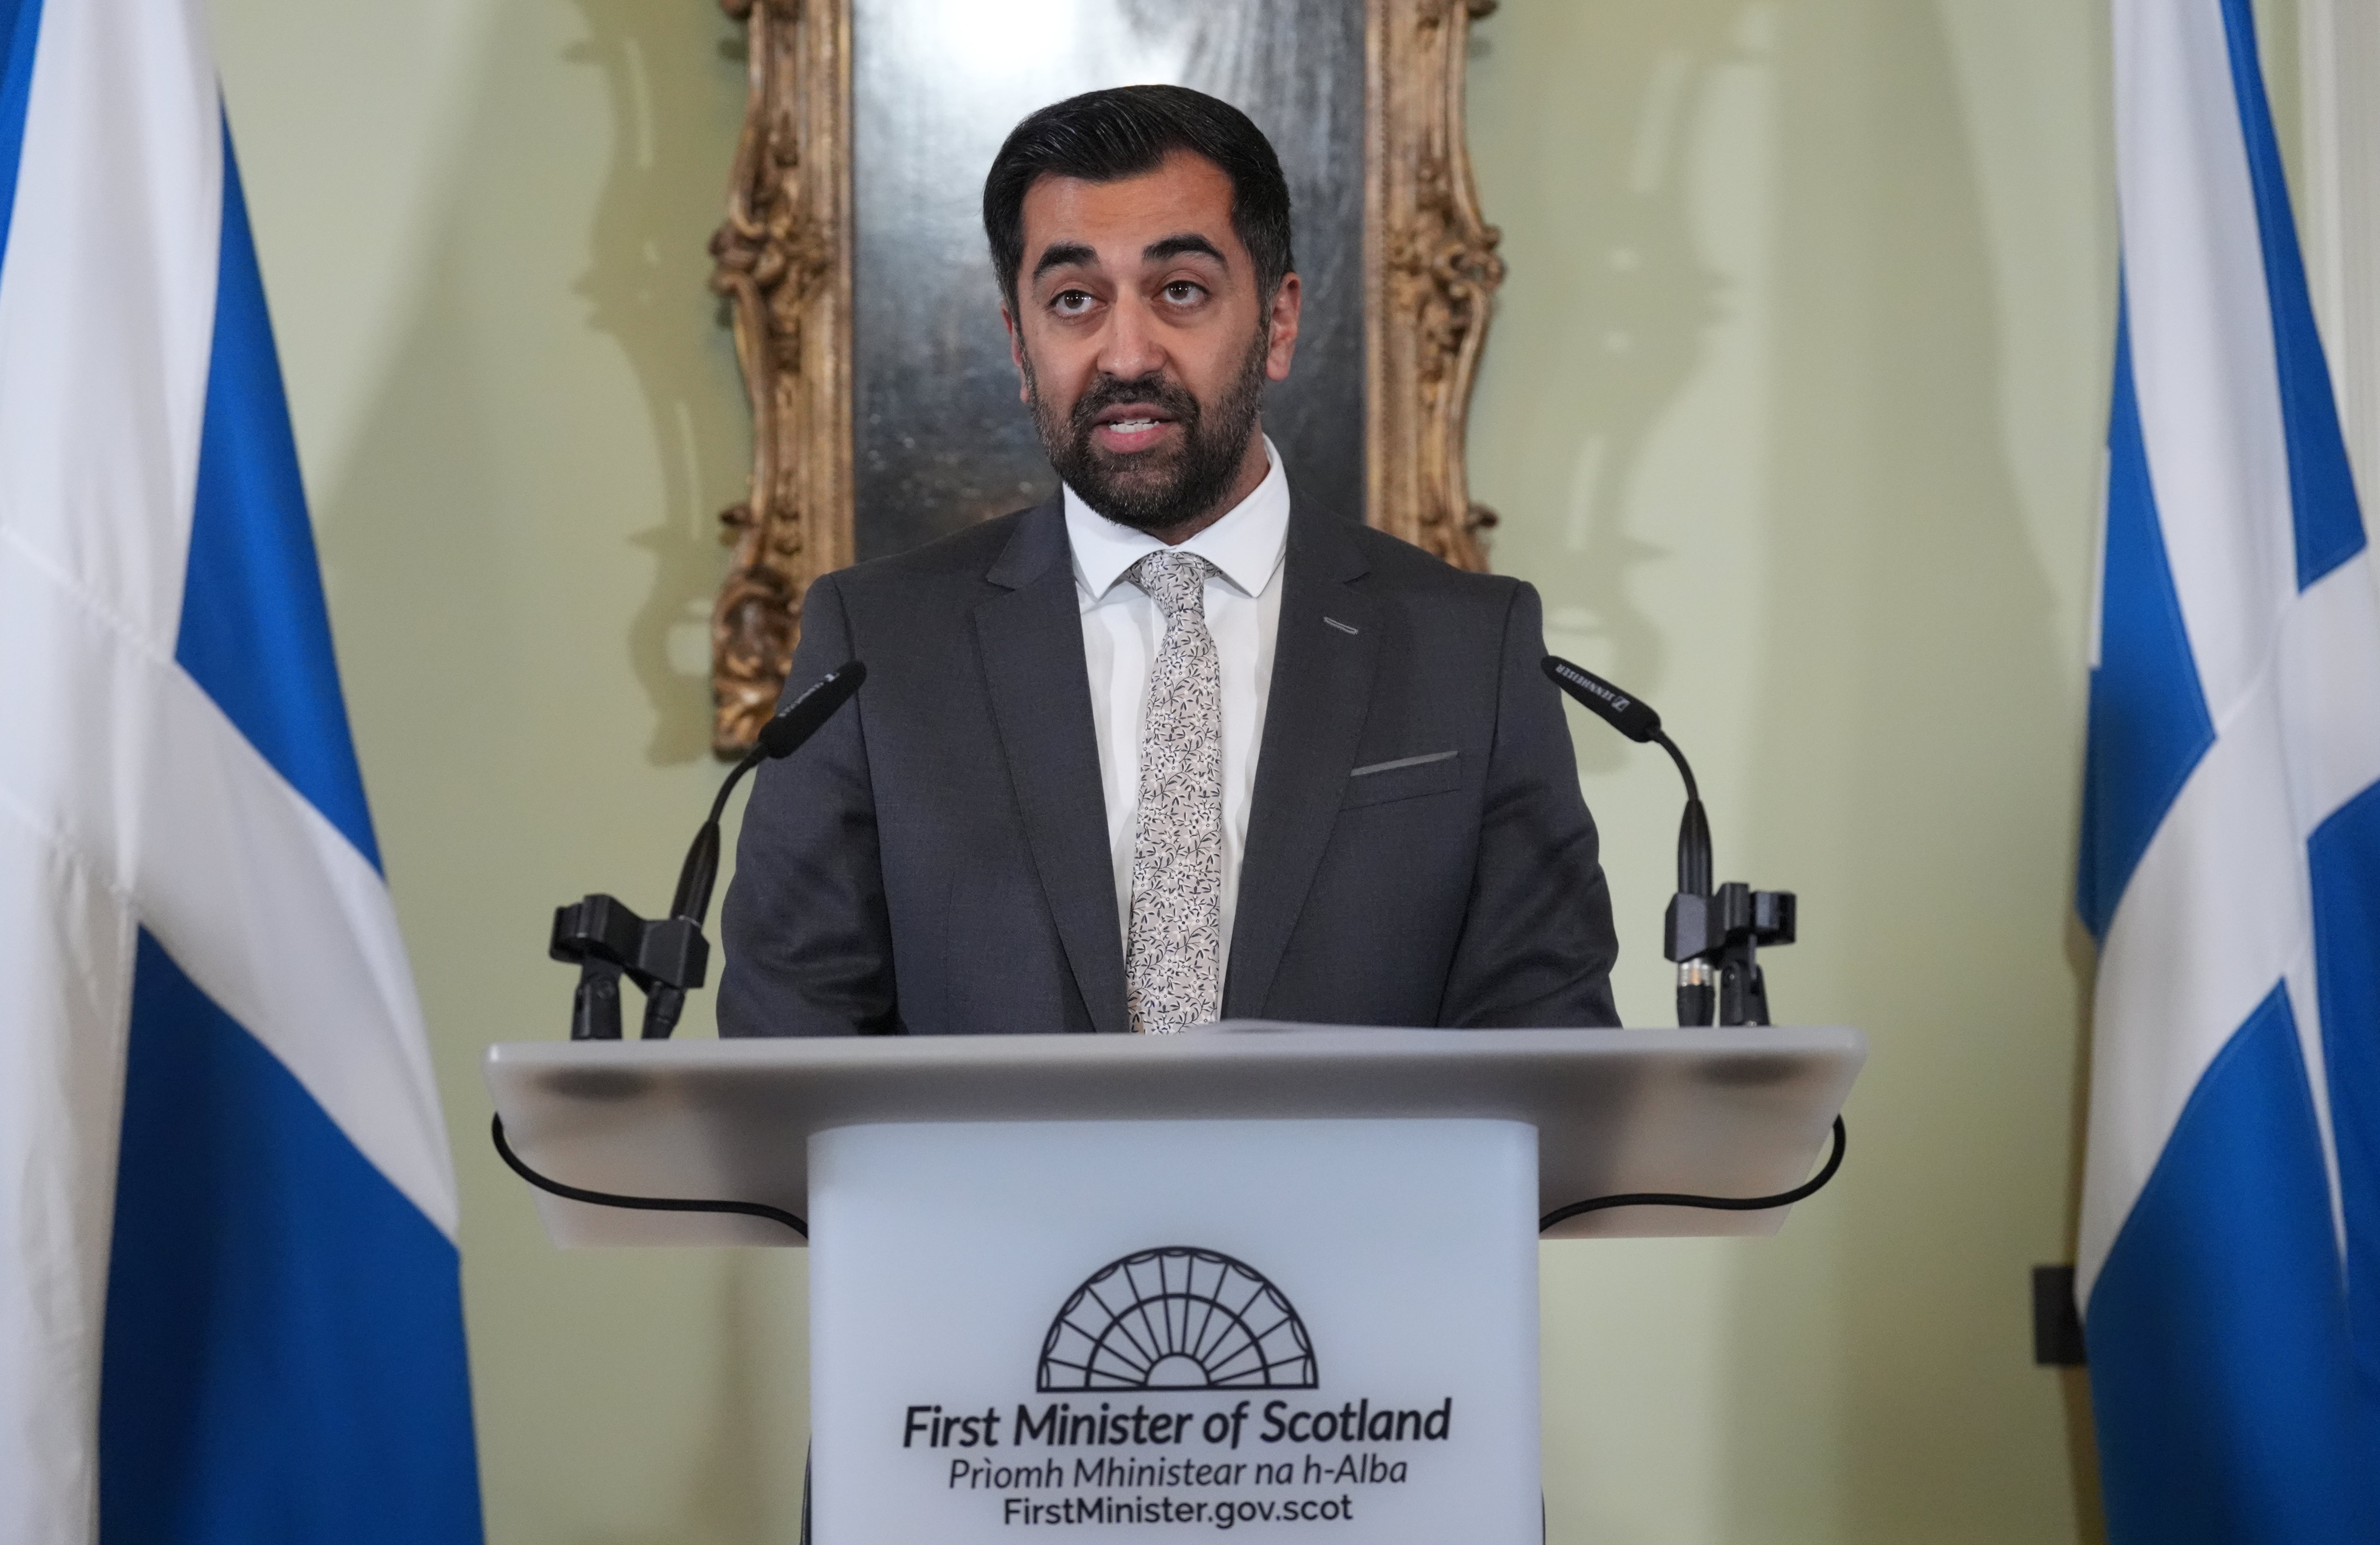 Humza Yousaf announces his resignation as first minister of Scoland on Monday at Bute House in Edinburgh